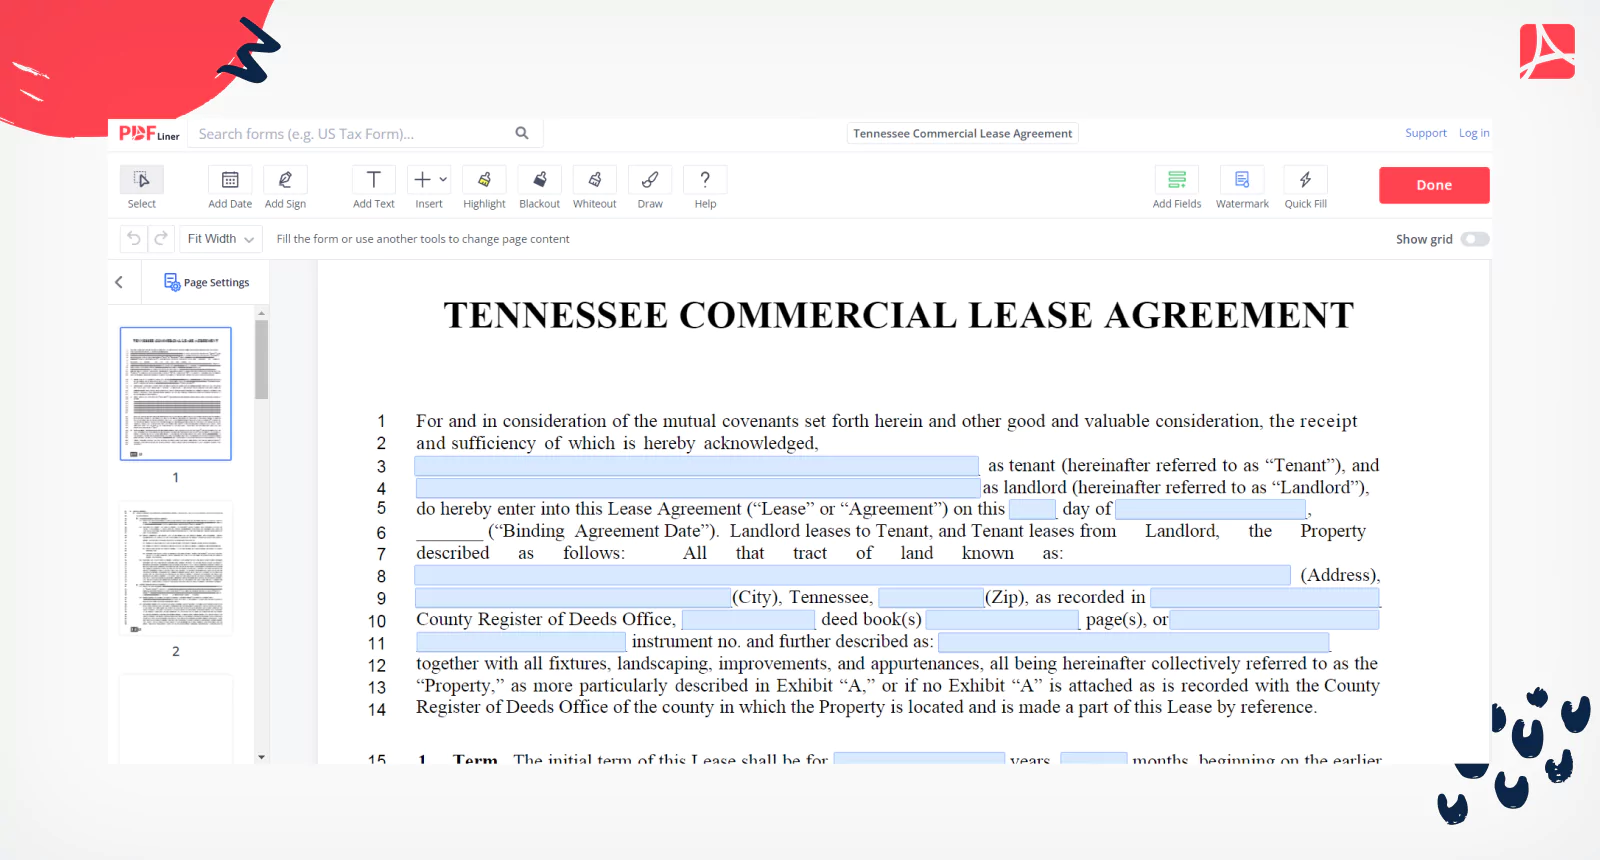 Tennessee Commercial Lease Agreement on PDFLiner